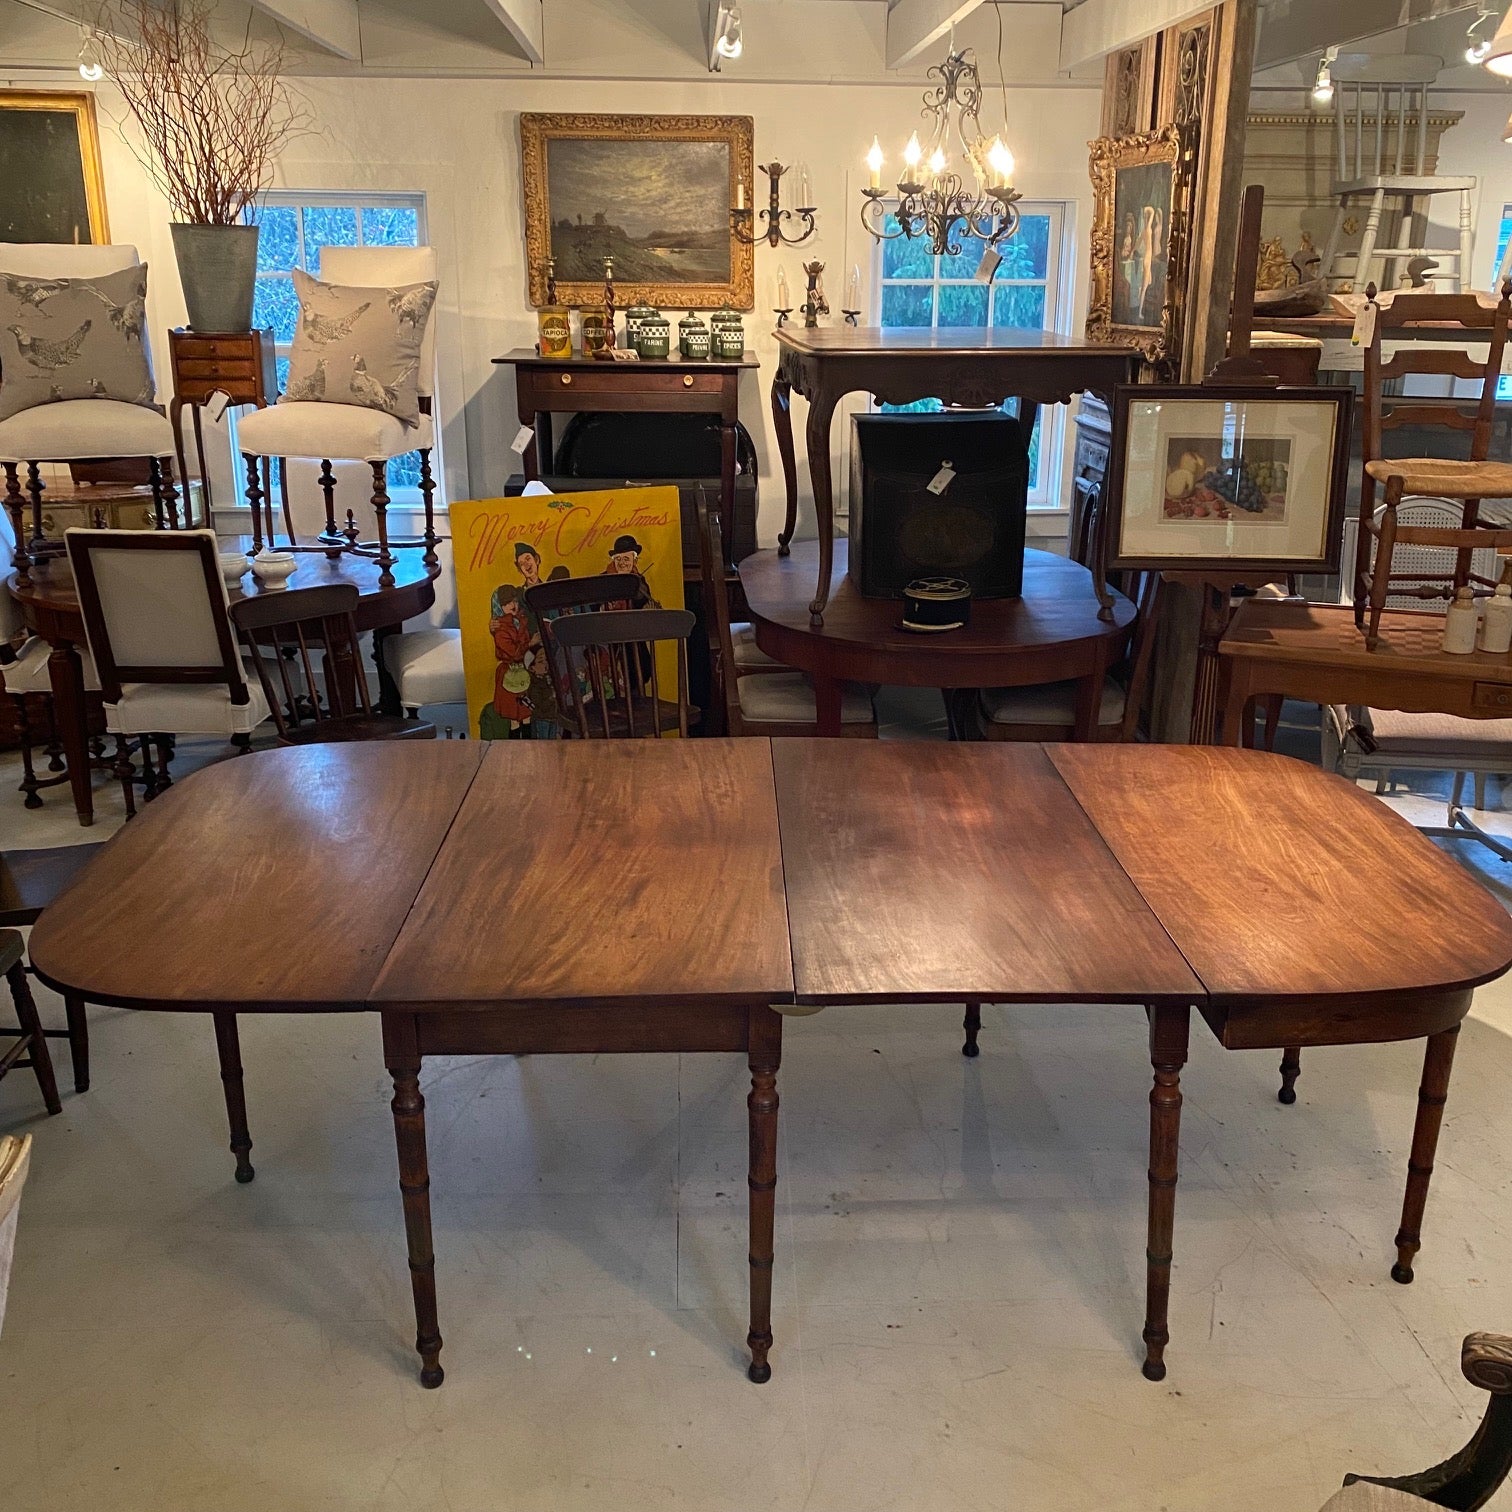 This early American primitive harvest table can be three different sizes, allowing for easy storage and versatility for smaller living spaces. 
W closed (no leaves up) 47”
W open (1 leaf in and drop leaf up) 93.5” 
W table open with only drop leaf